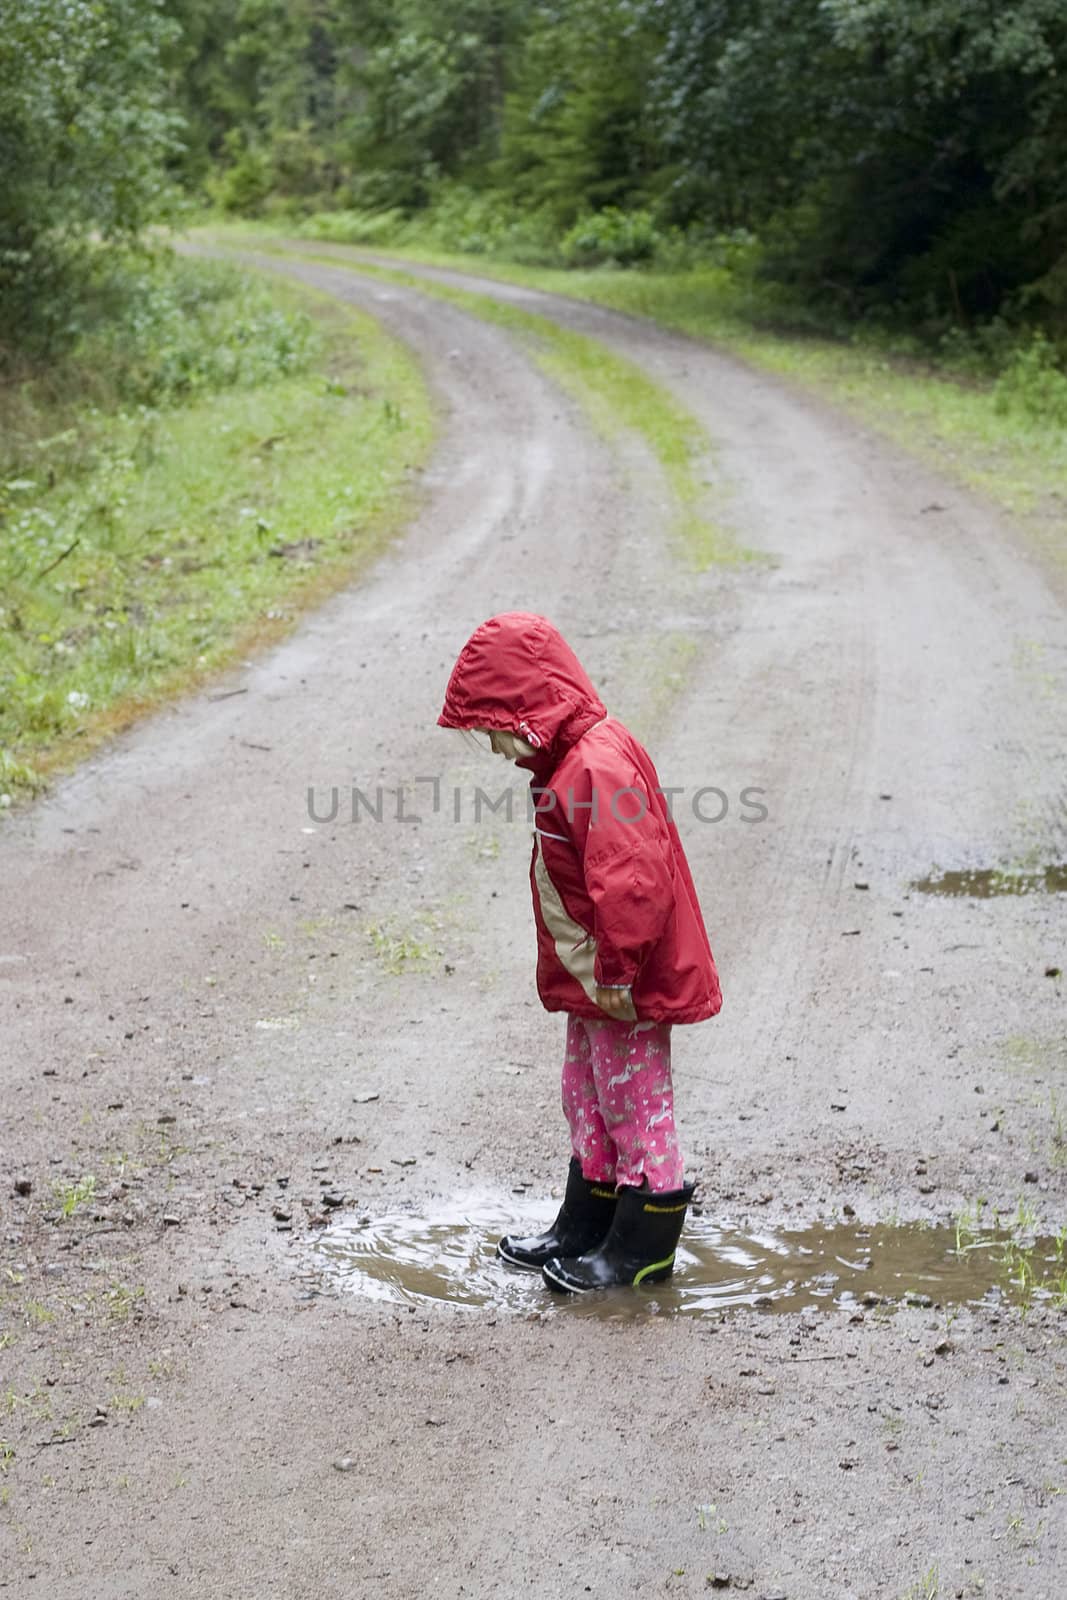 A little 4 year old girl is standing in a rain pu ddle on a country road in the rain